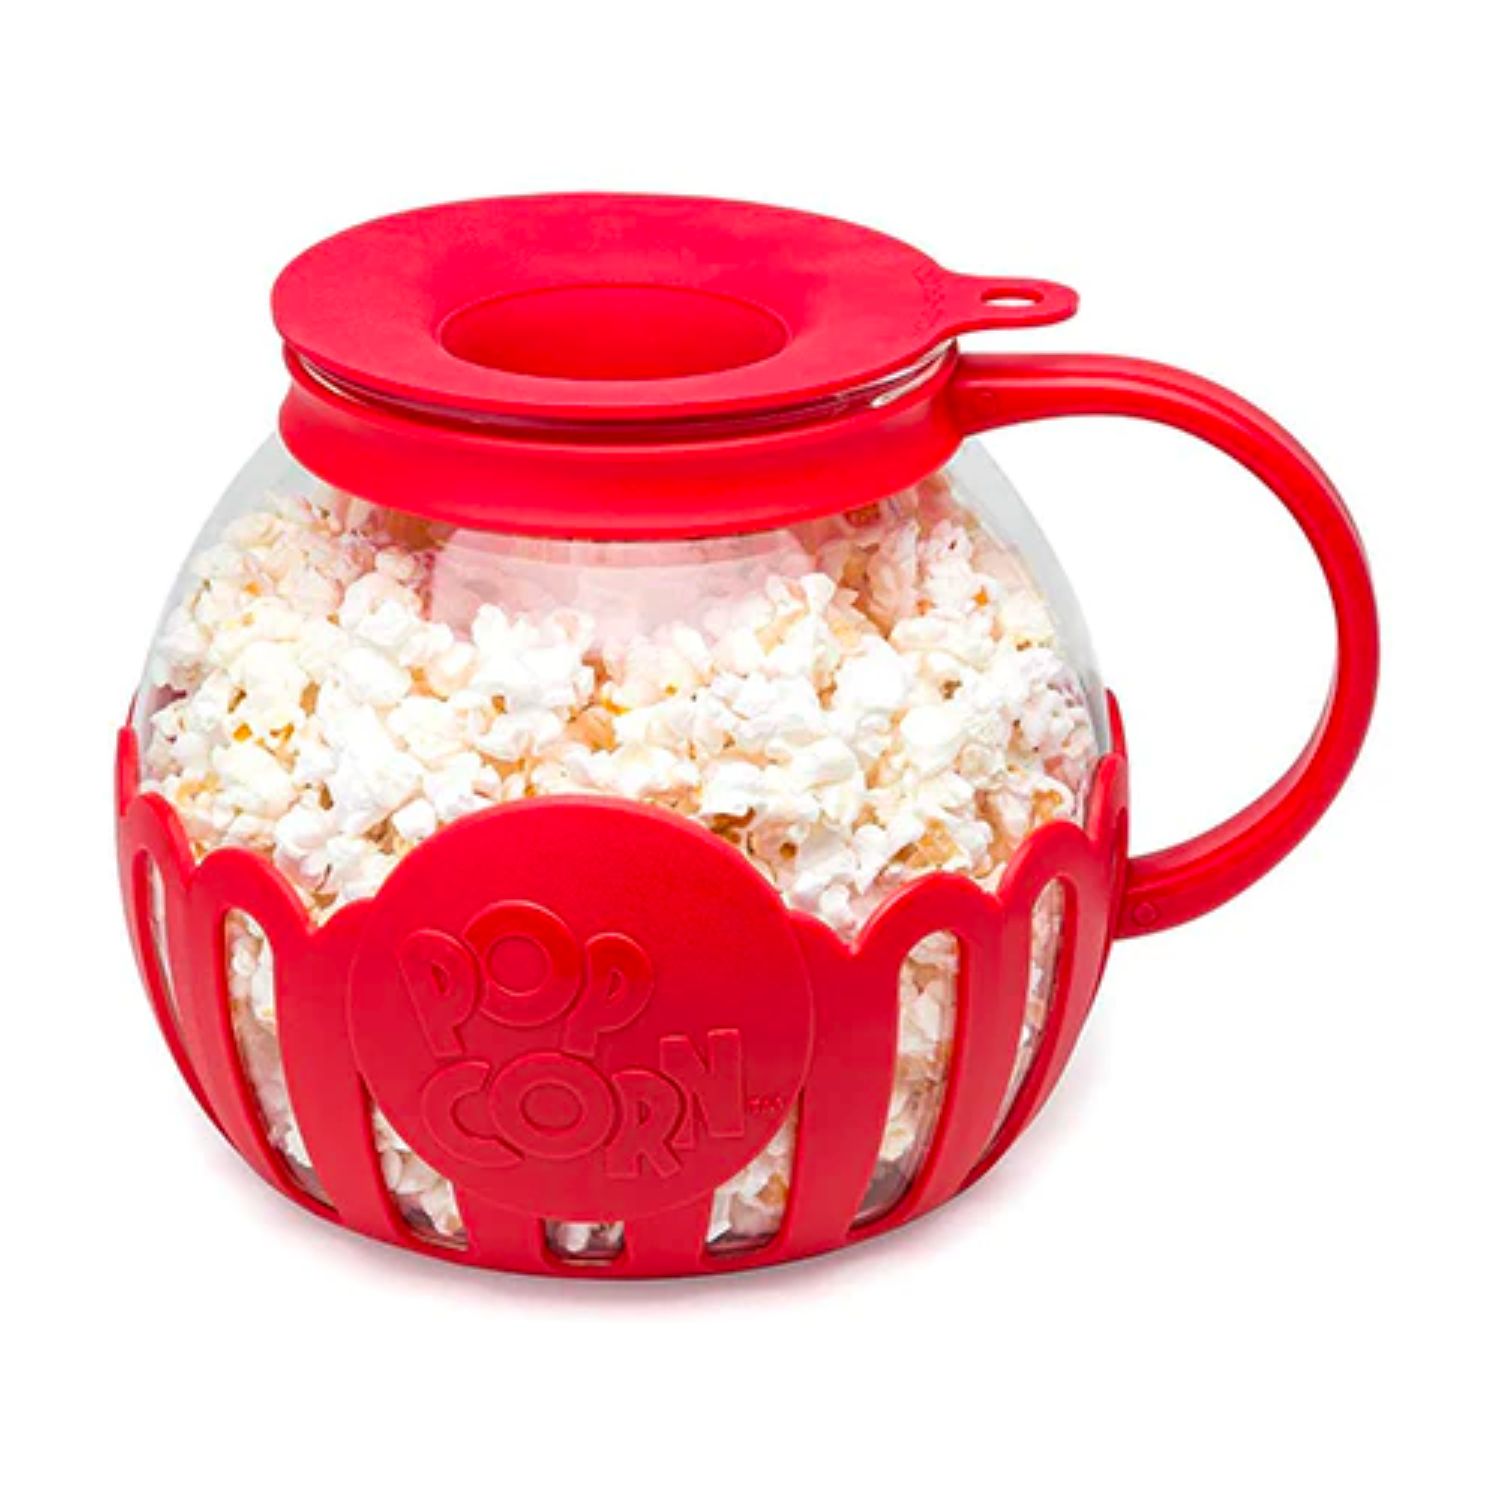 The Best Gifts for College Students: Microwave Popcorn Maker